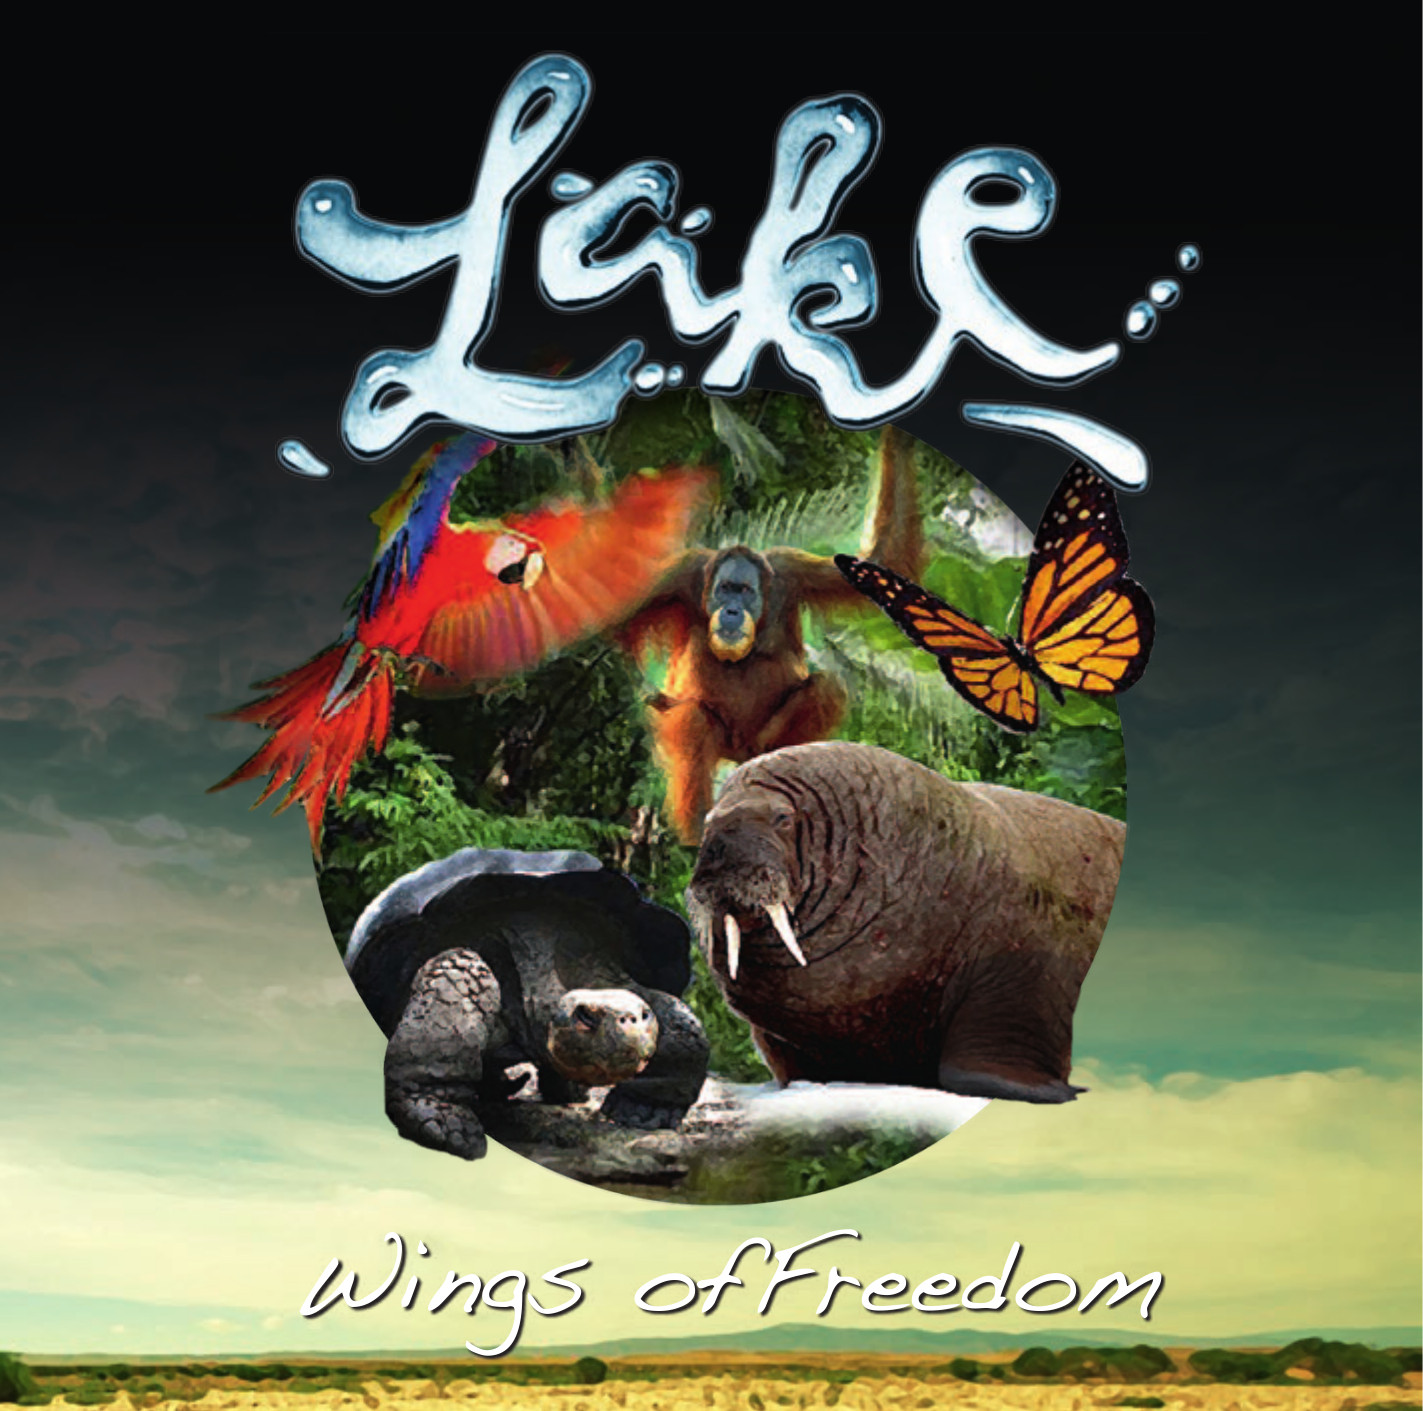 Lake - “Wings Of Freedom” (Mad As Hell Productions/Cargo)